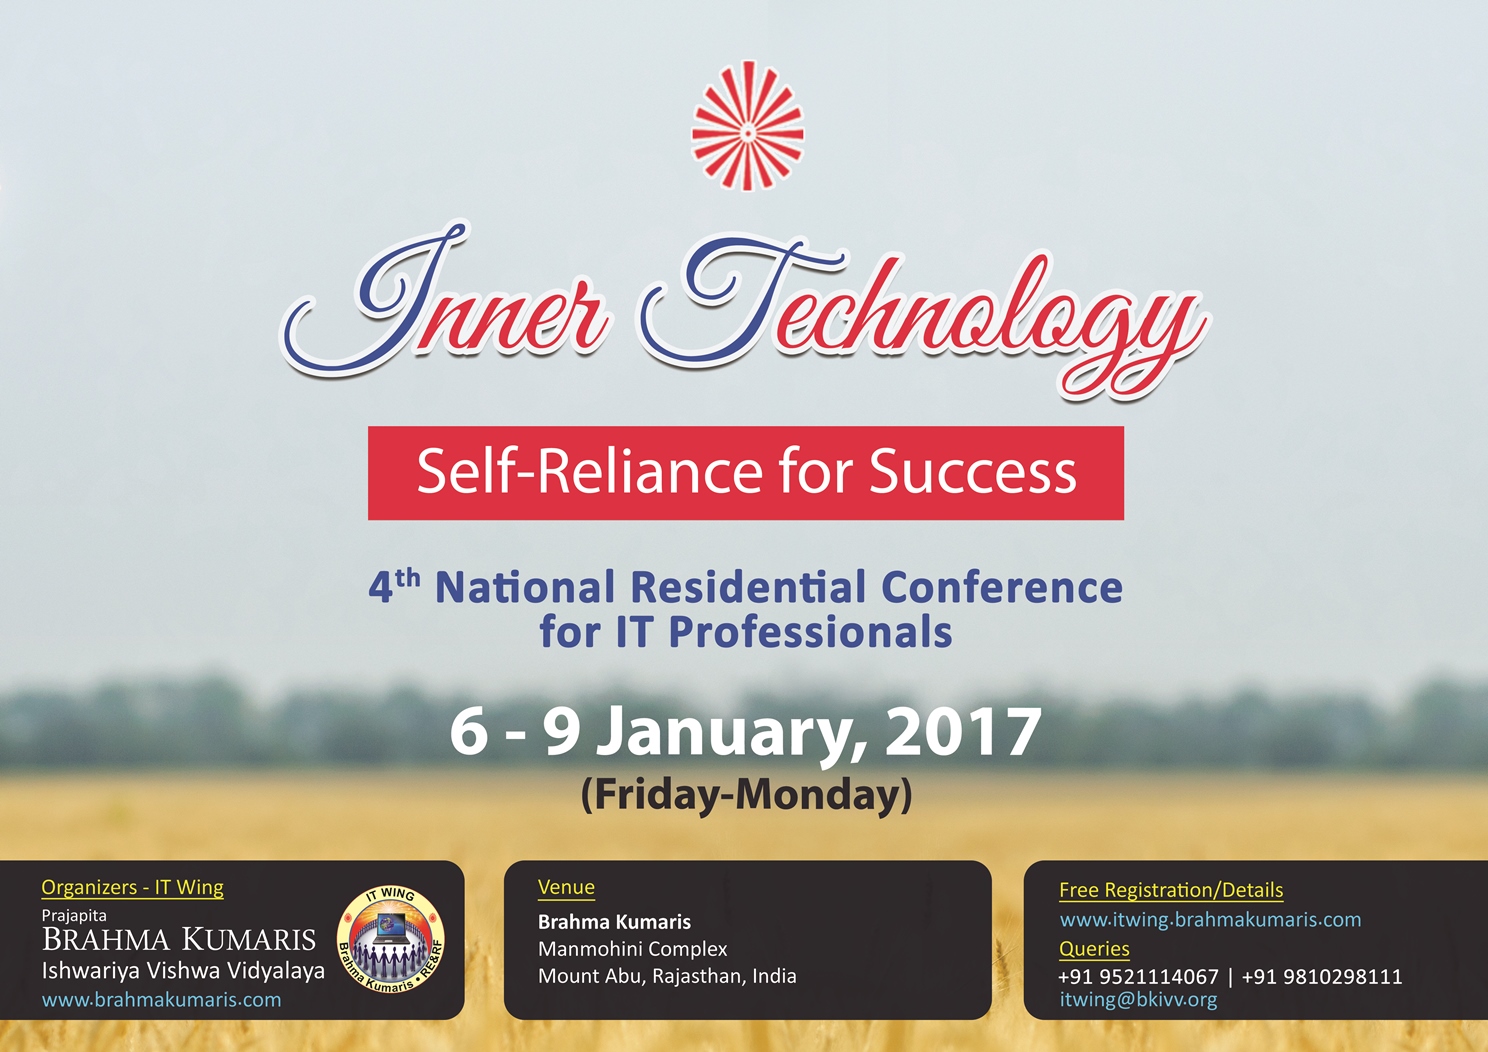 4th National Residential Conference for IT Professional (Inner Technology - Self Reliance for Success), Mount Abu, Rajasthan, India